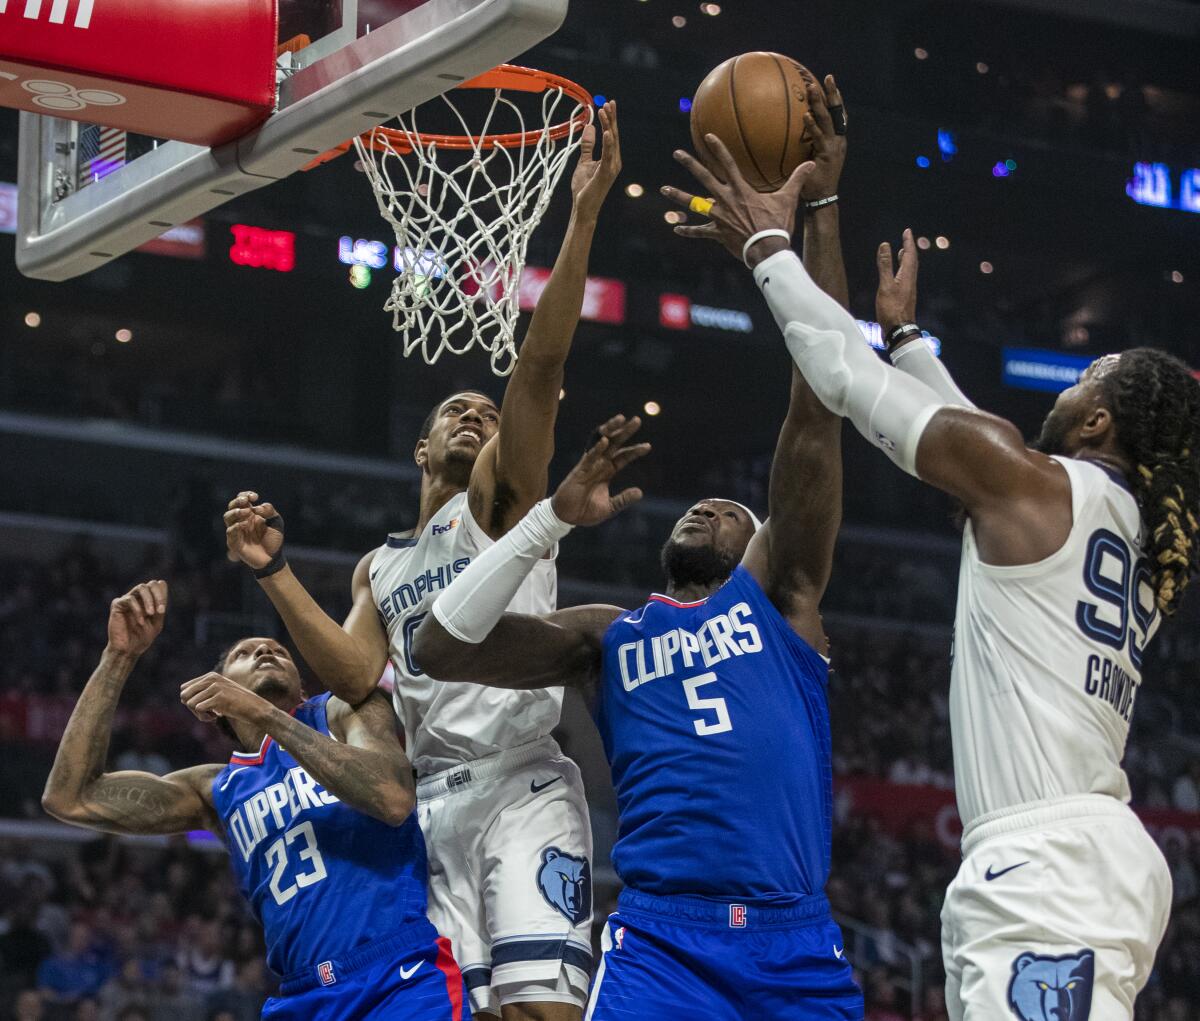 The Clippers' Montrezl Harrell (5) goes up for a shot against the Grizzlies on Jan. 4, 2020.